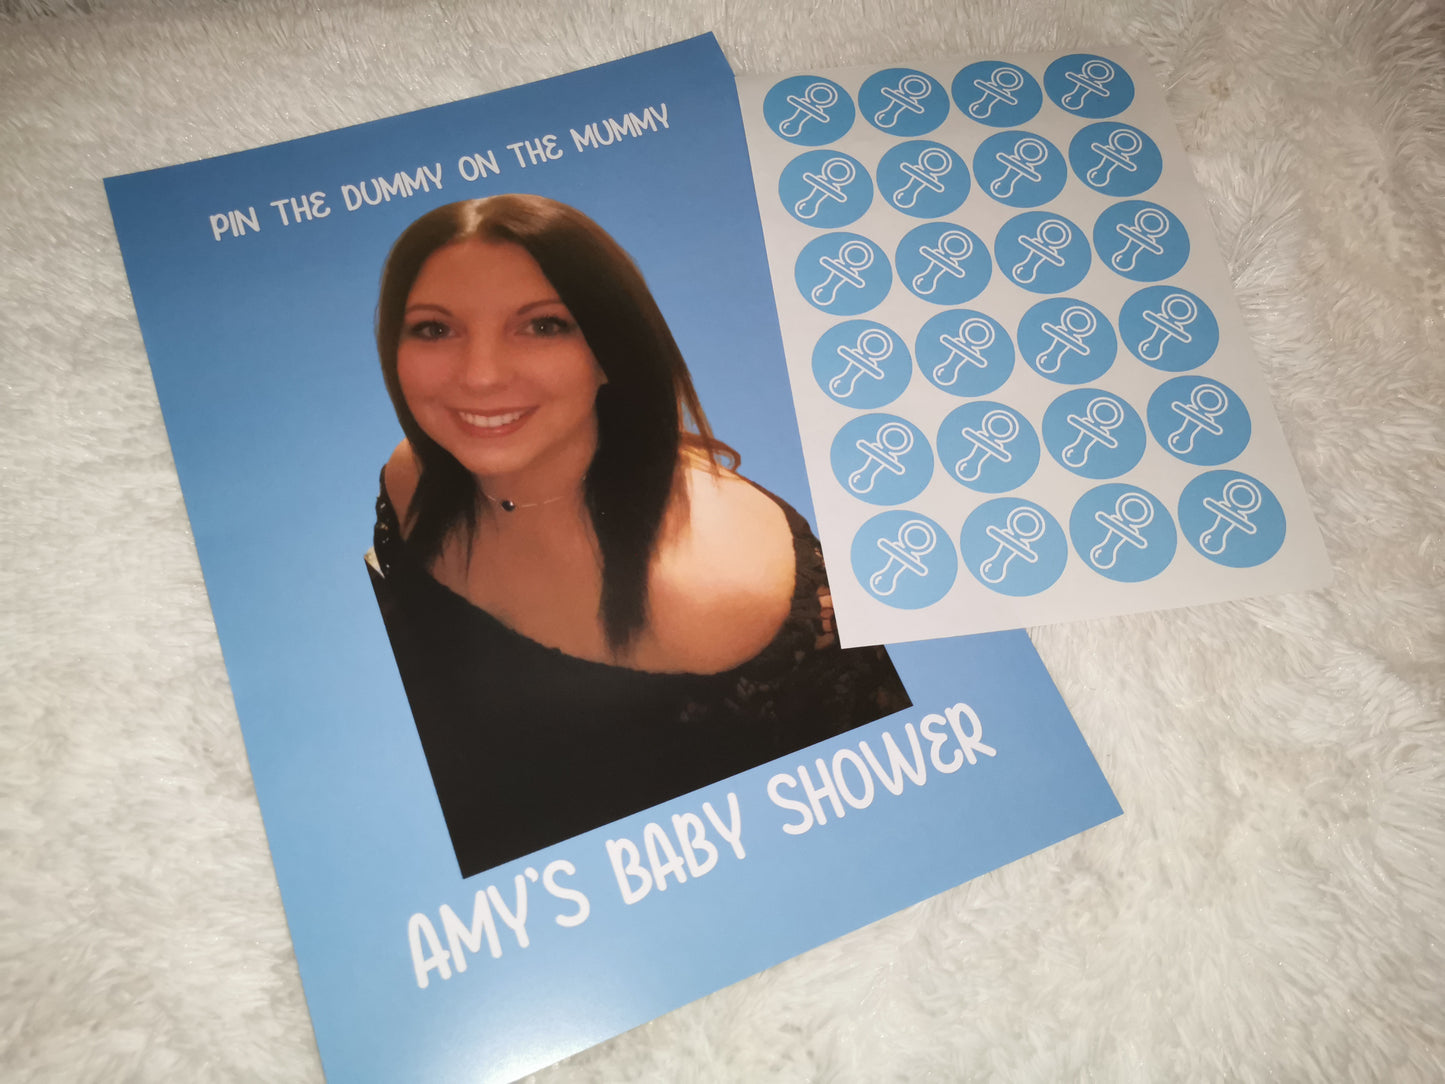 Baby Shower Game | Pin The Dummy On The Mummy | Baby Shower Ideas